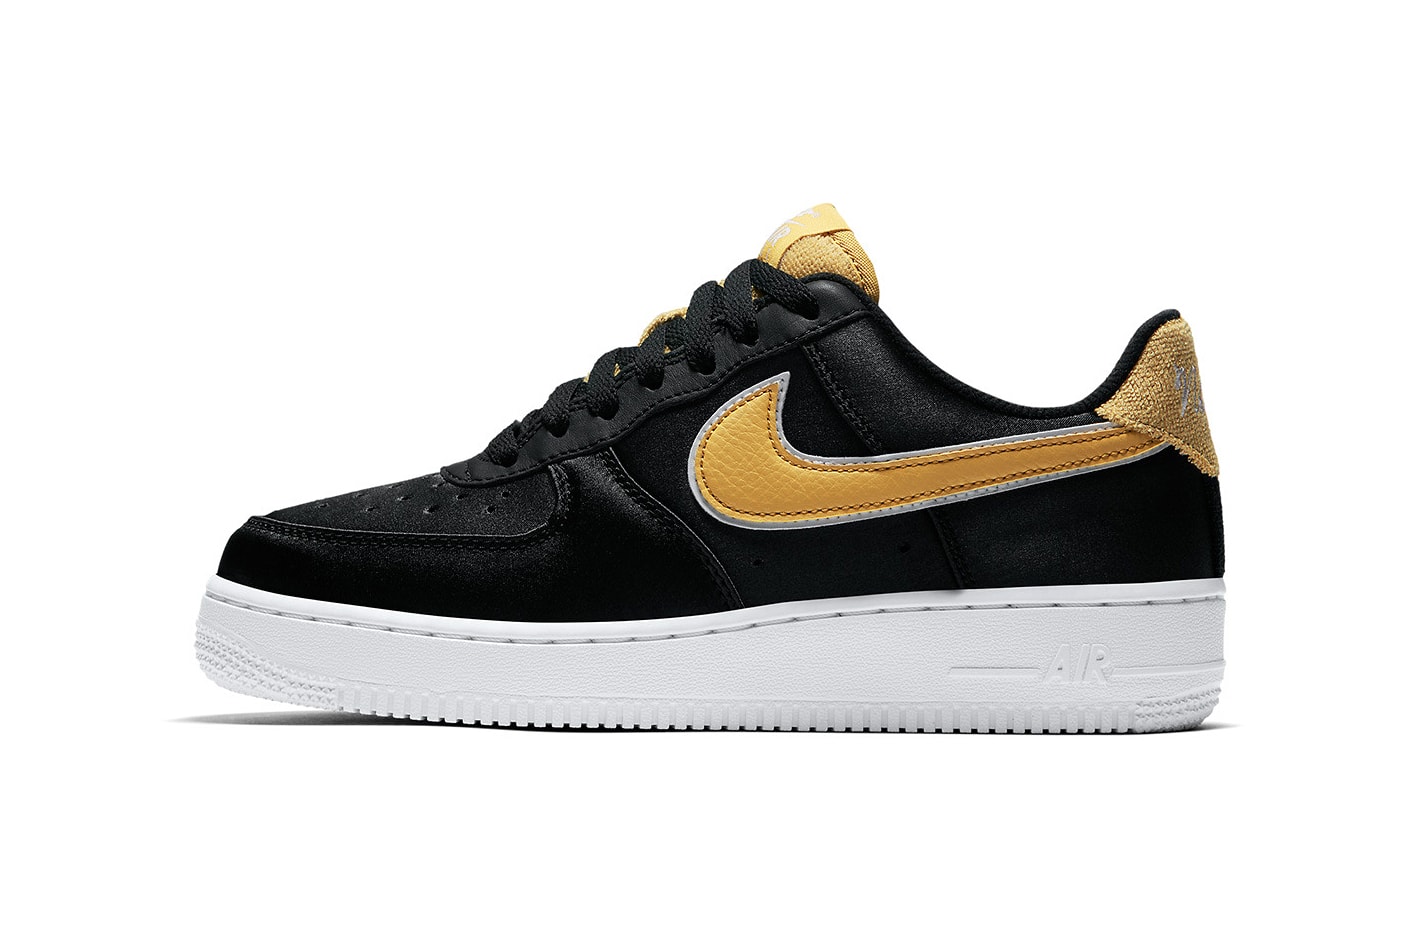 Nike Air Force 1 Low Satin Black and Gold